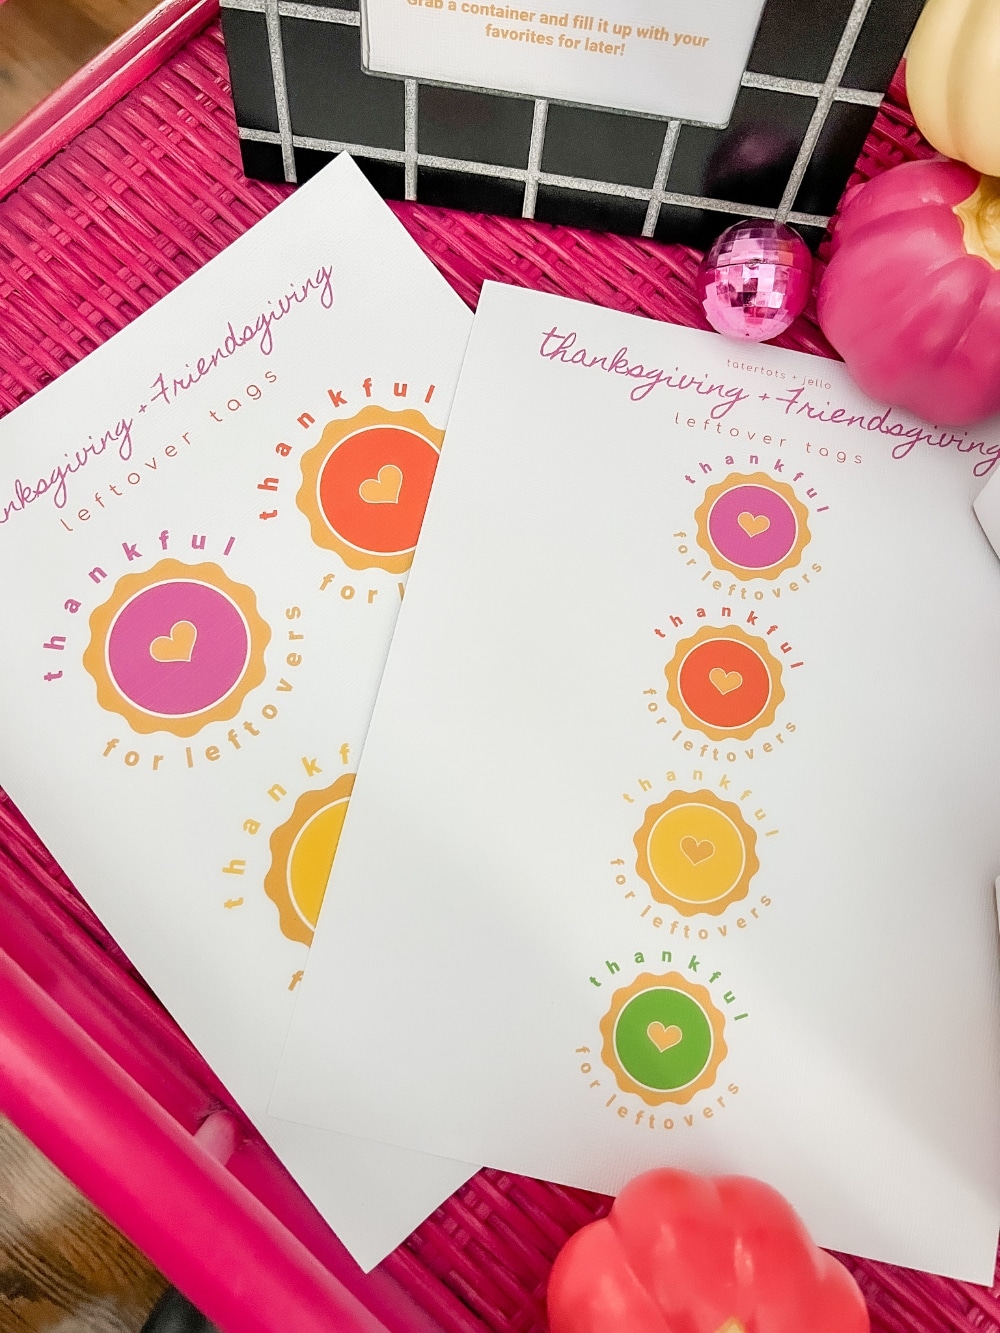 Free Friendsgiving Leftover Printable Tags and Sign. Send your guests home with these colorful leftover printable tags and sign, perfect for Friendsgiving or Thanksgiving!